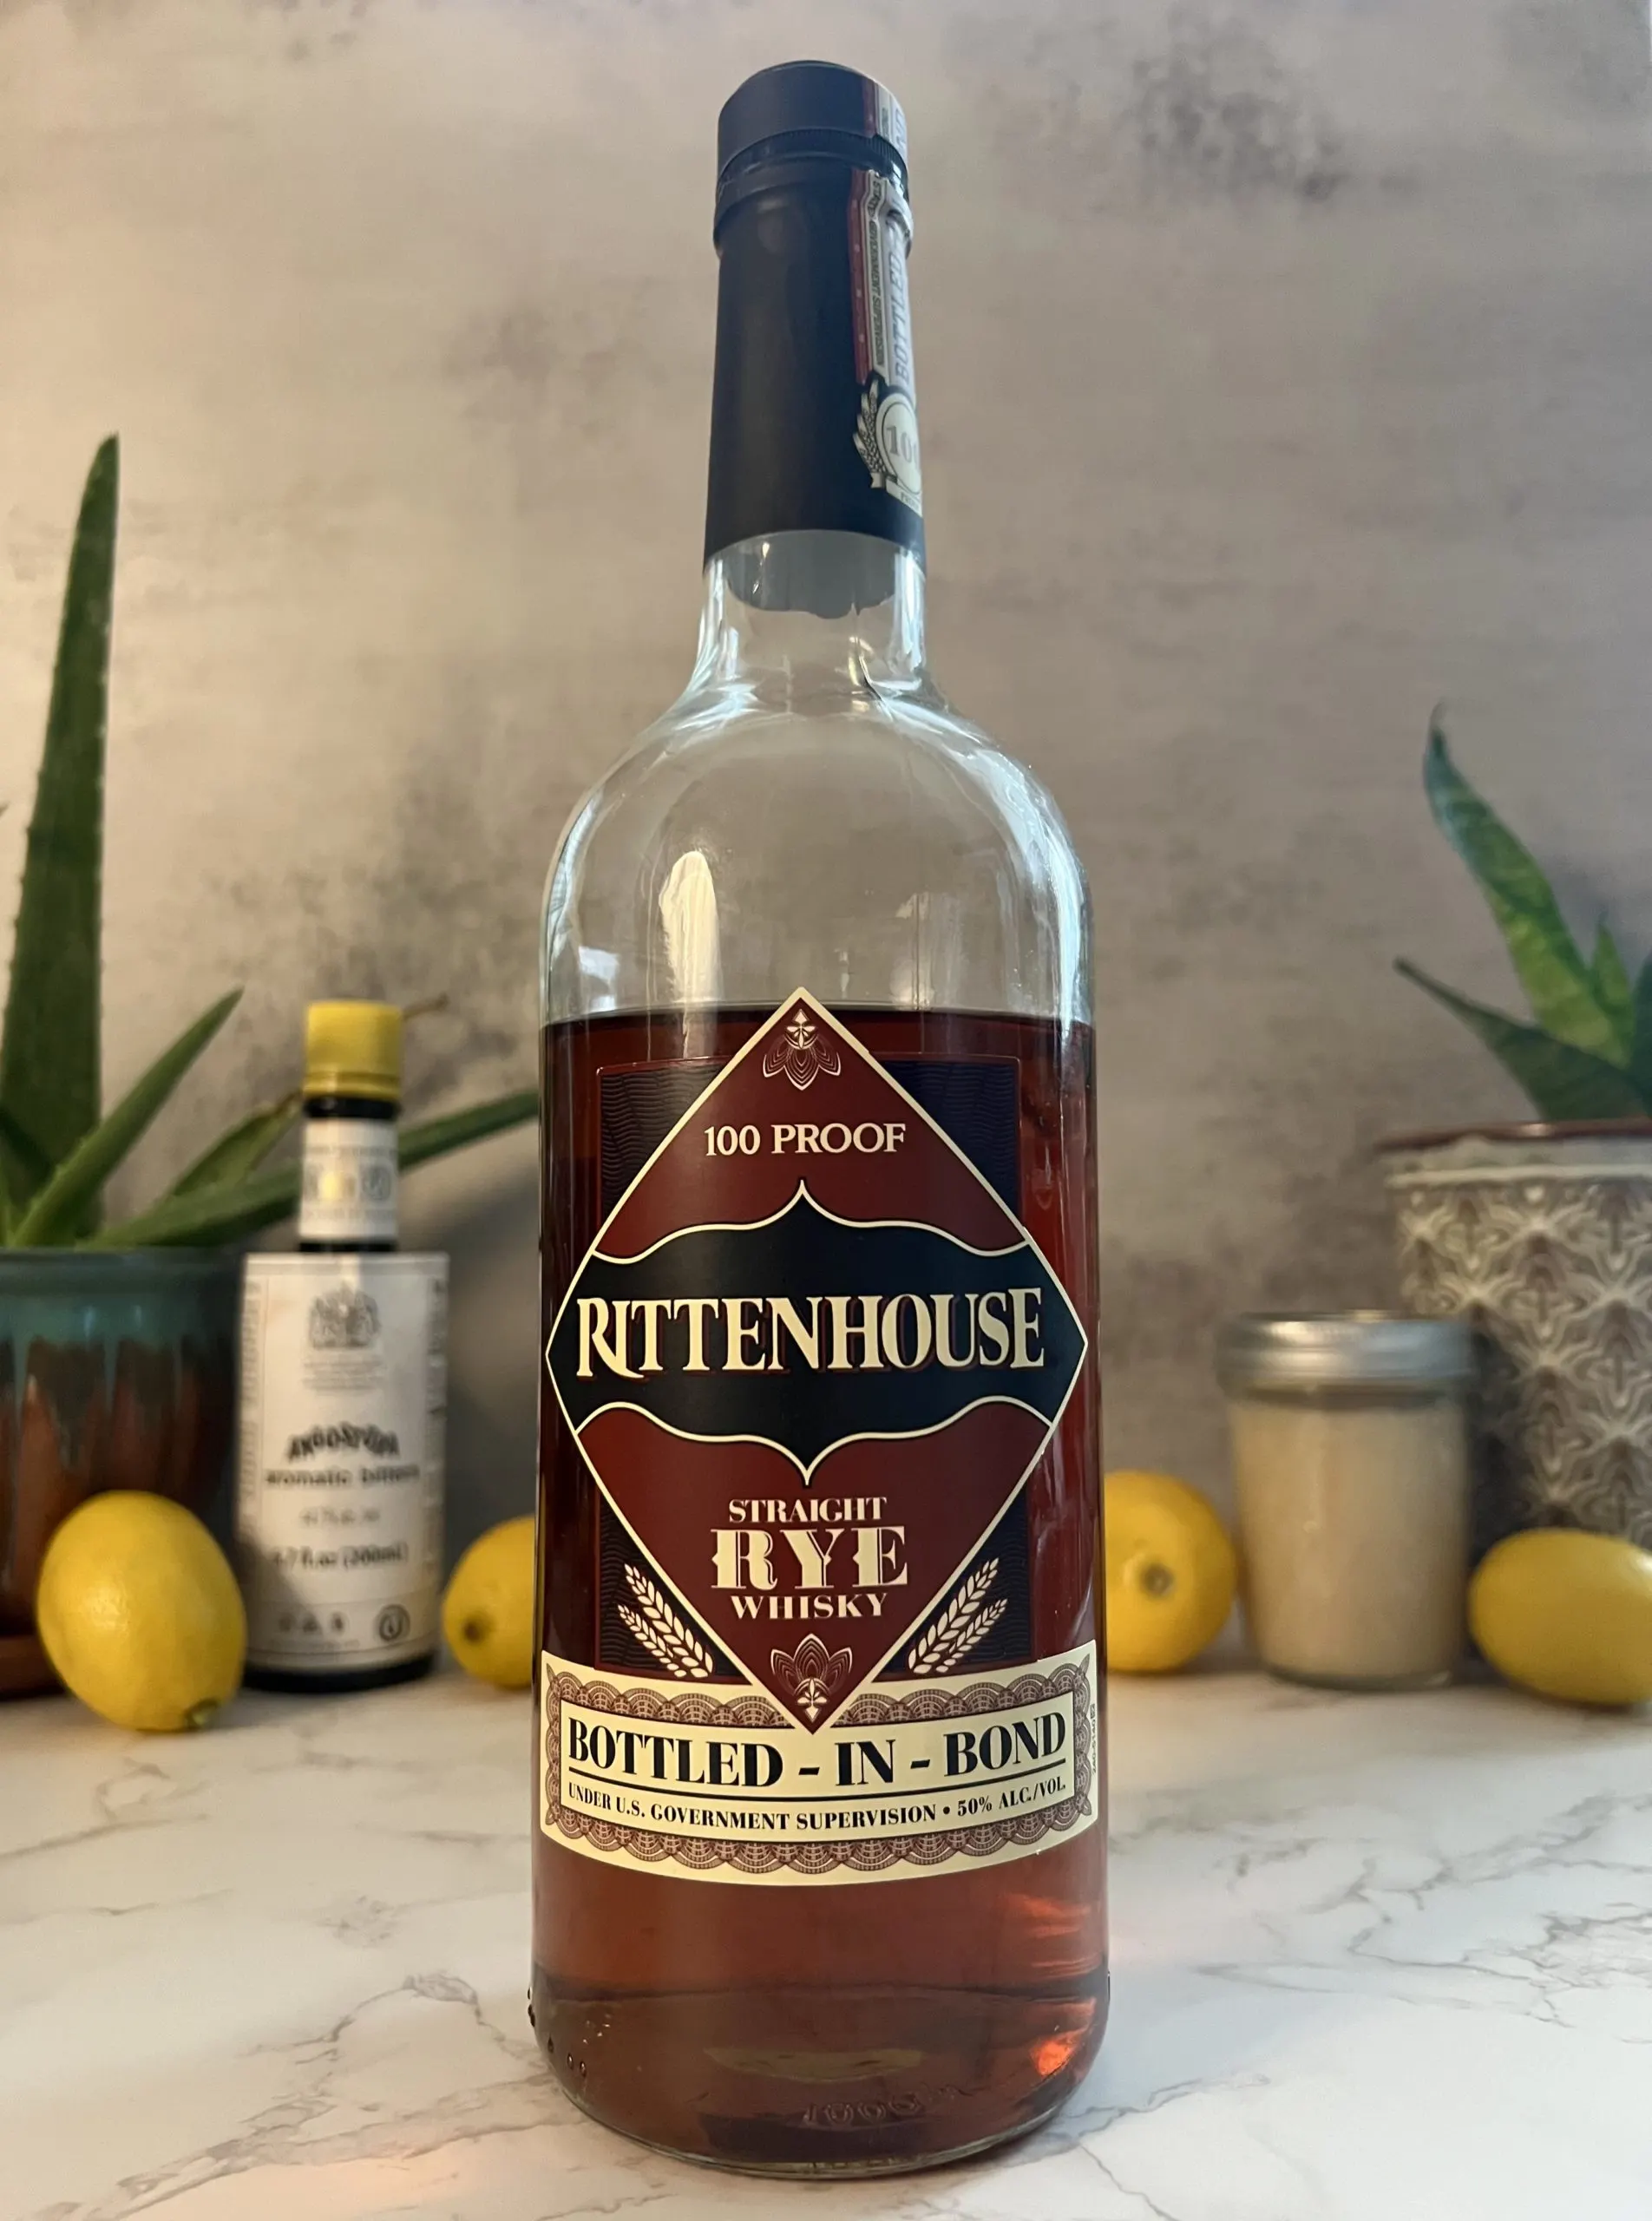 A close up shot of a bottle of Rittenhouse Straight Rye Whisky in the foreground with lemons, plants, and other ingredients in the background.